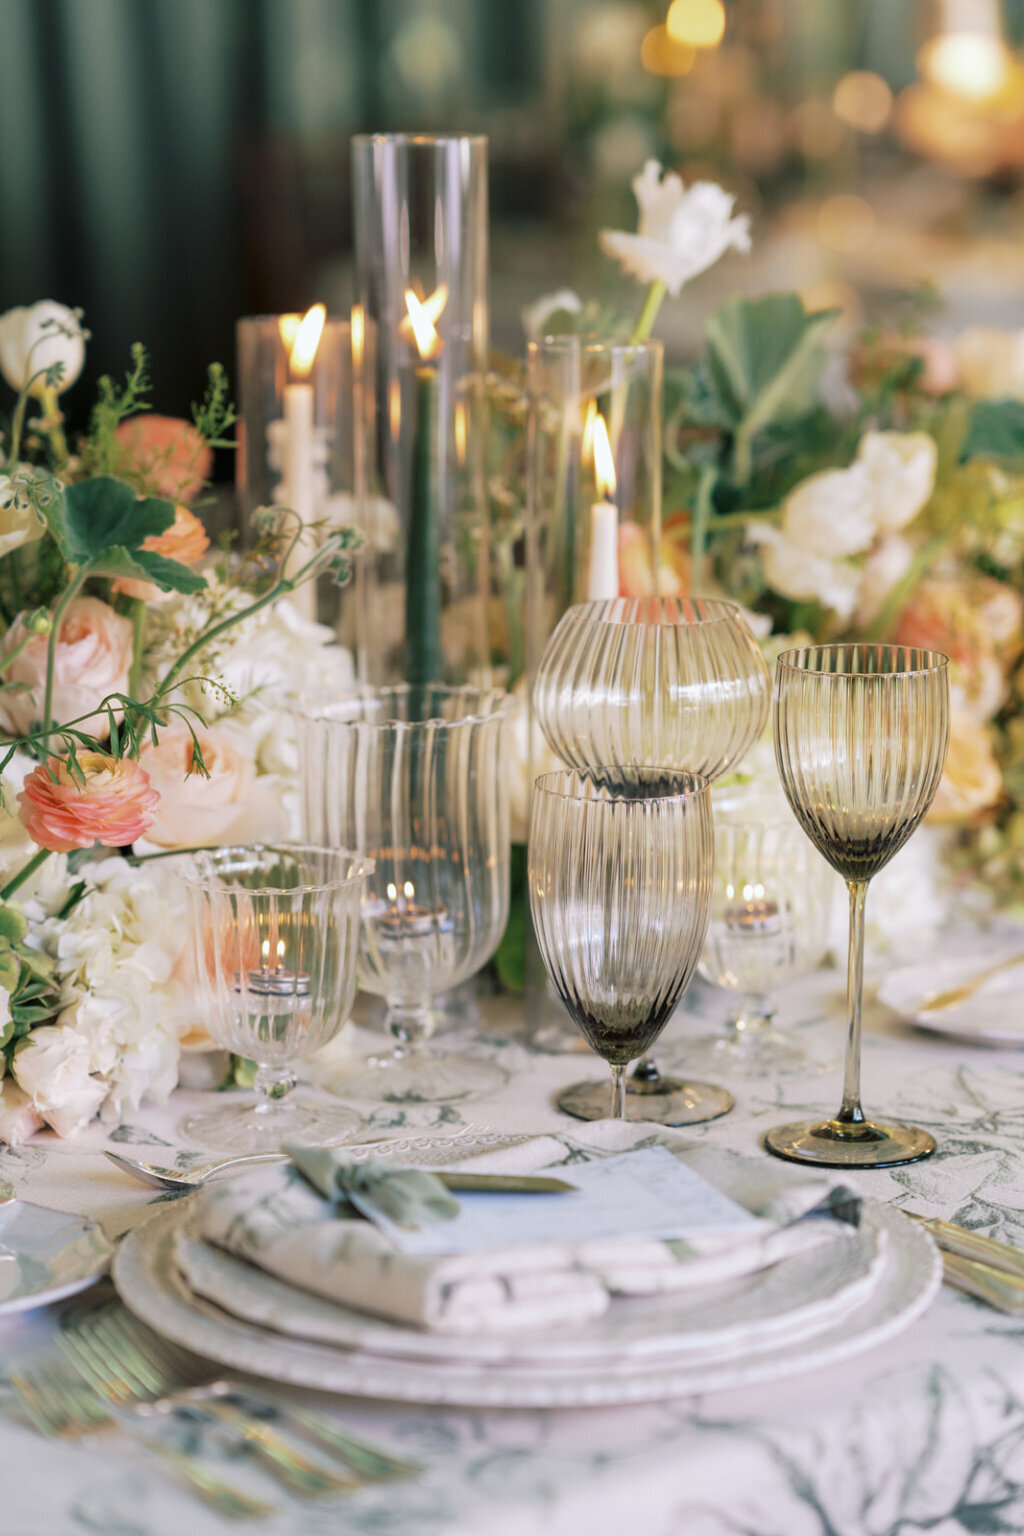 George & Anne Wedding Table scape 